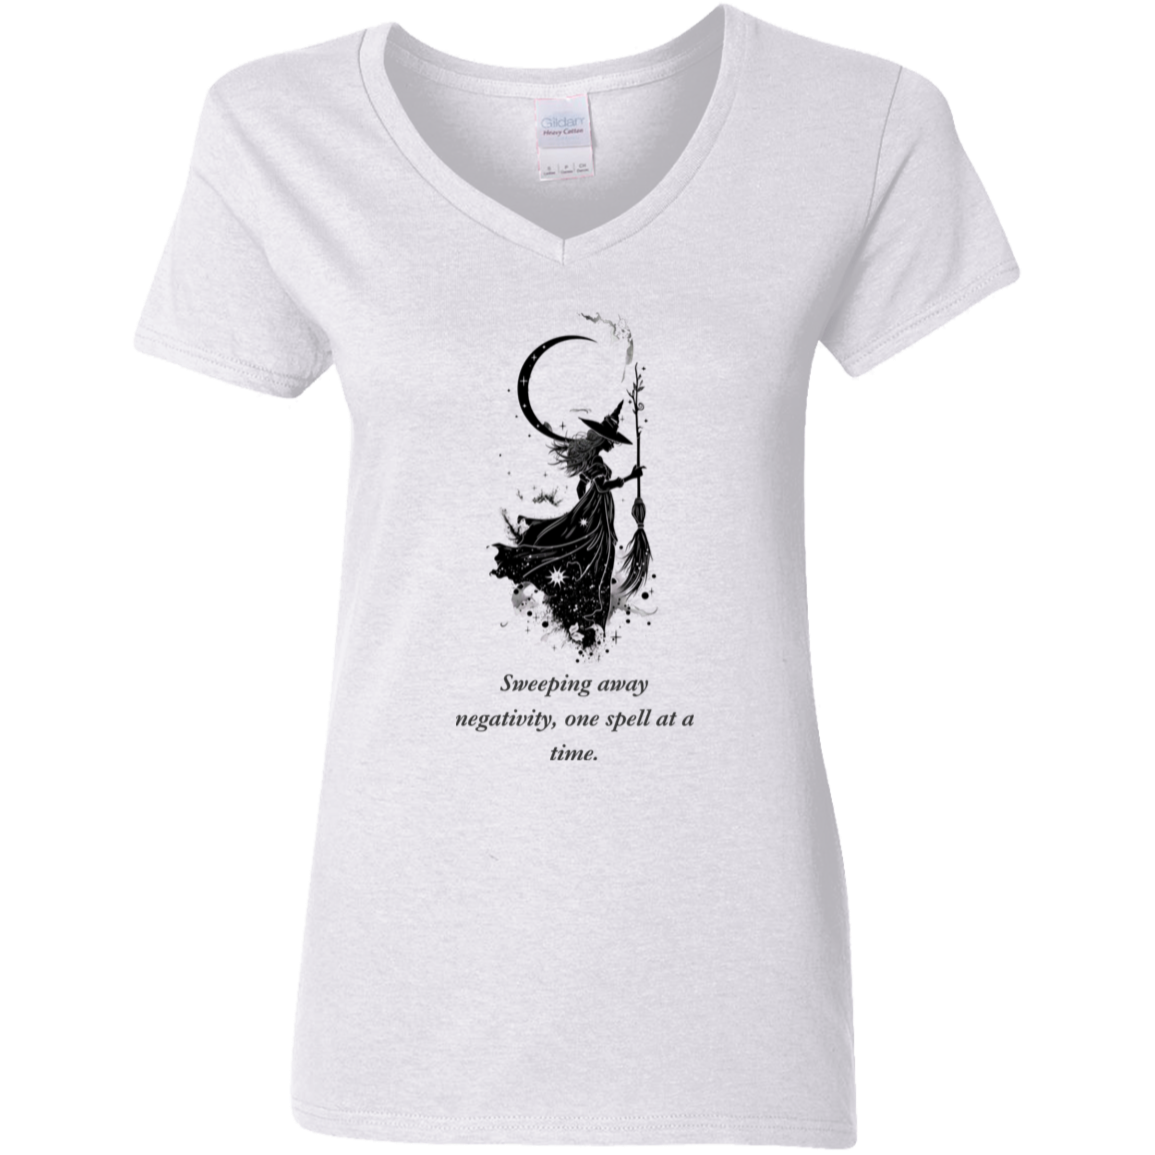 Sweeping away negativity one spell at a time. White T shirt from BLK Moon shop.